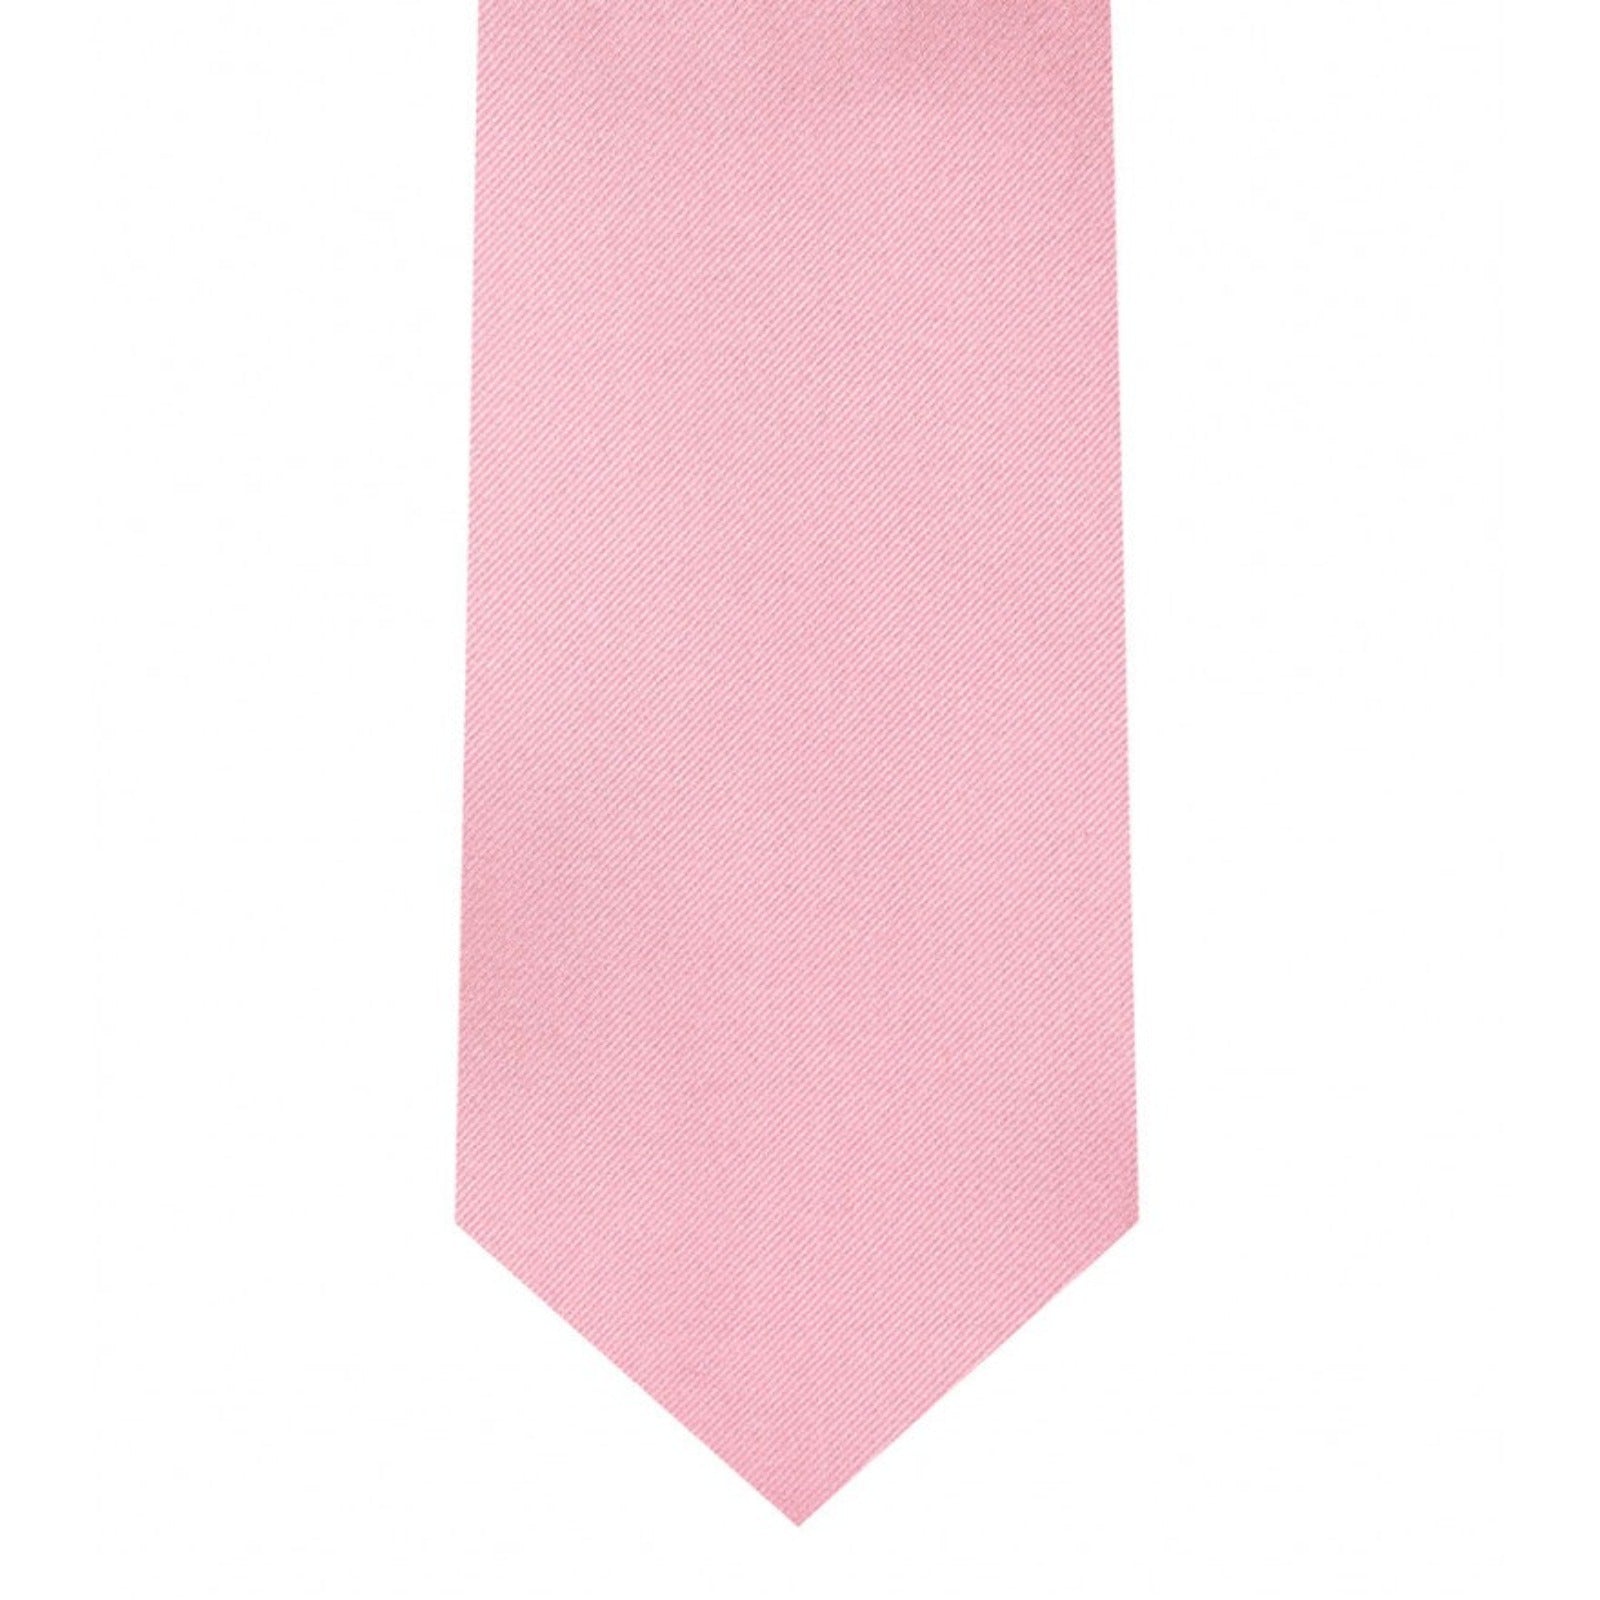 Classic Pink Tie Skinny width 2.75 inches With Matching Pocket Square | KCT Menswear